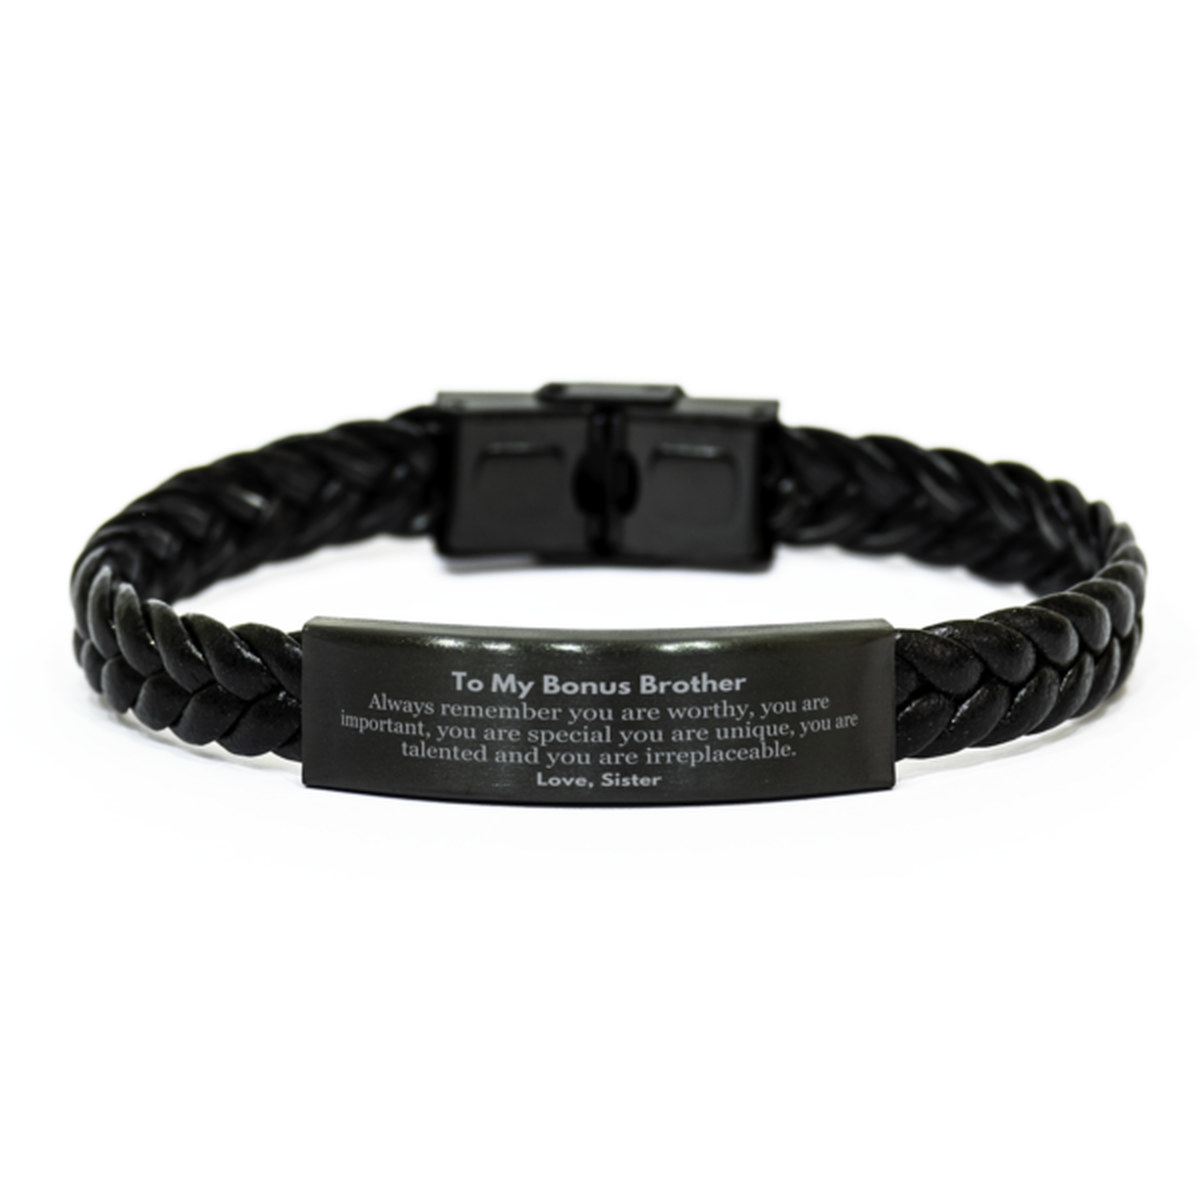 Bonus Brother Birthday Gifts from Sister, Inspirational Braided Leather Bracelet for Bonus Brother Christmas Graduation Gifts for Bonus Brother Always remember you are worthy, you are important. Love, Sister